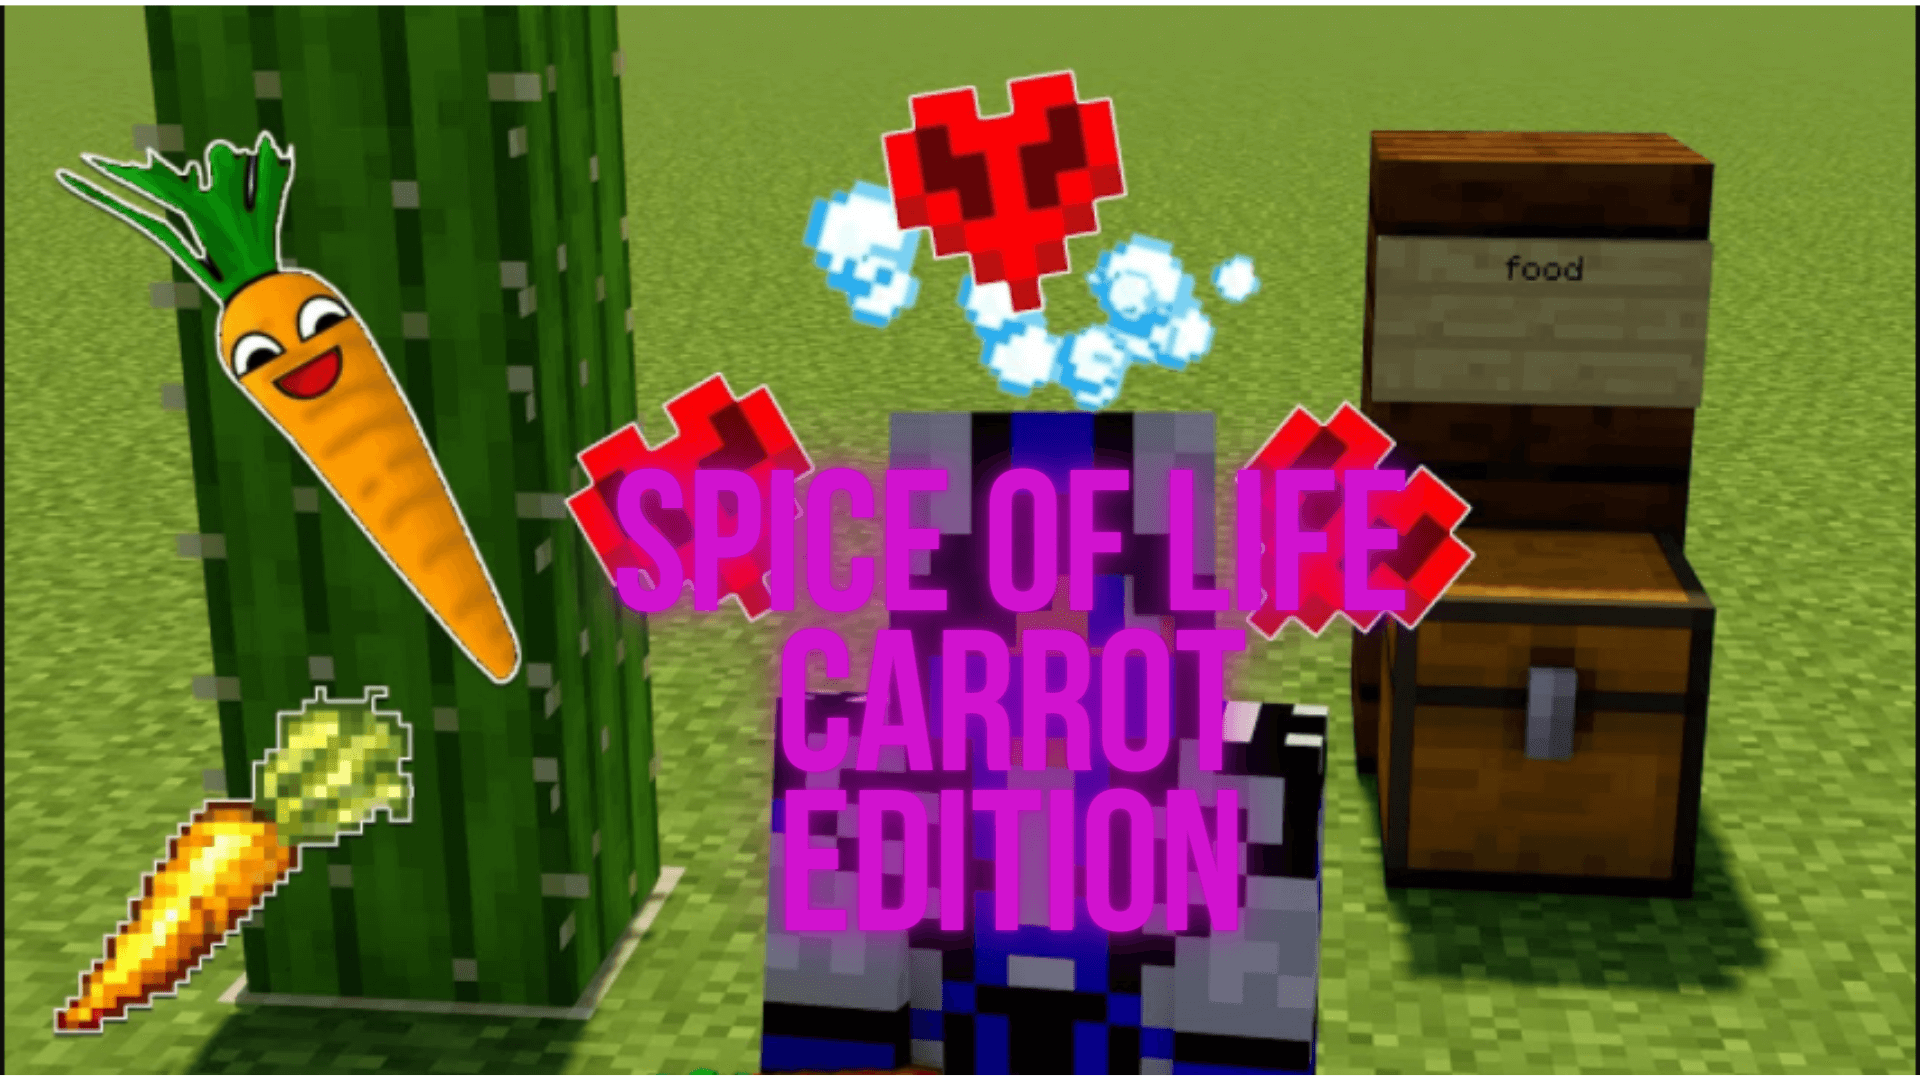 Spice of Life Carrot Edition Mod